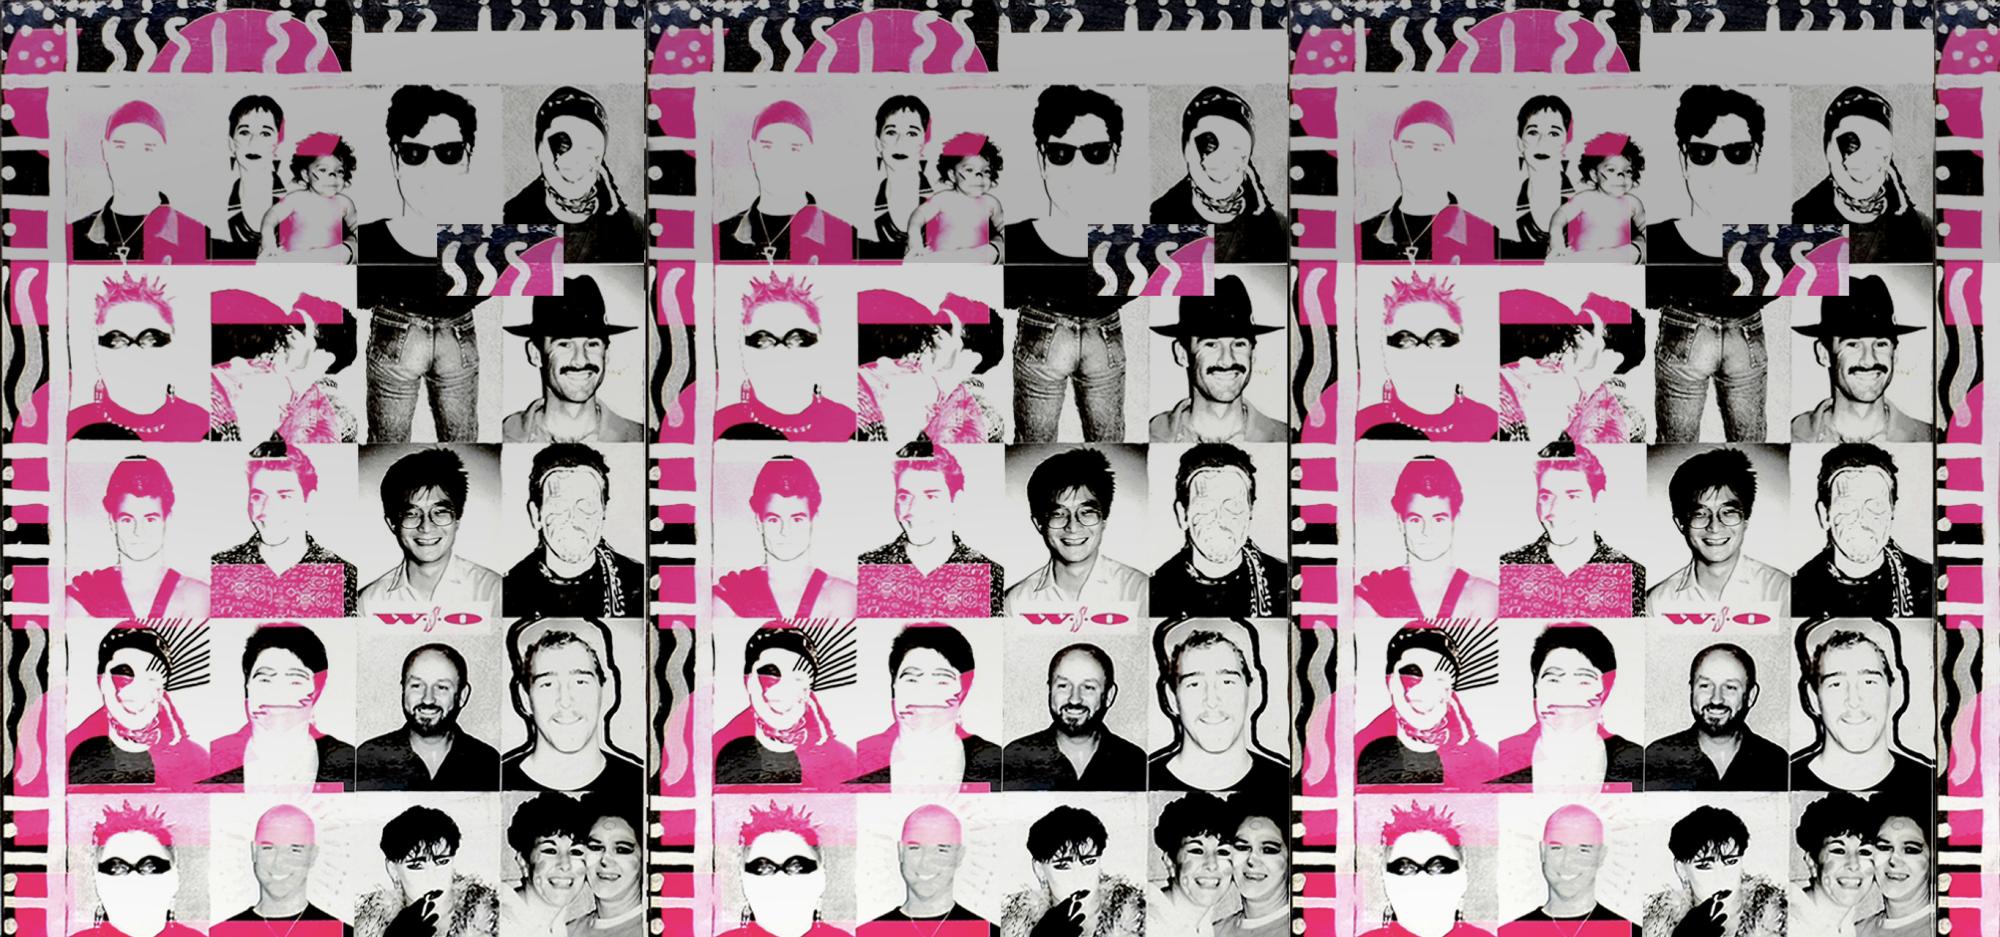 A pride march poster from 1991 featuring a collection of headshots of people, arranged in a grid formation, showing people smiling and posing decorated with a 90s style graphic  overlay in bright pink and black